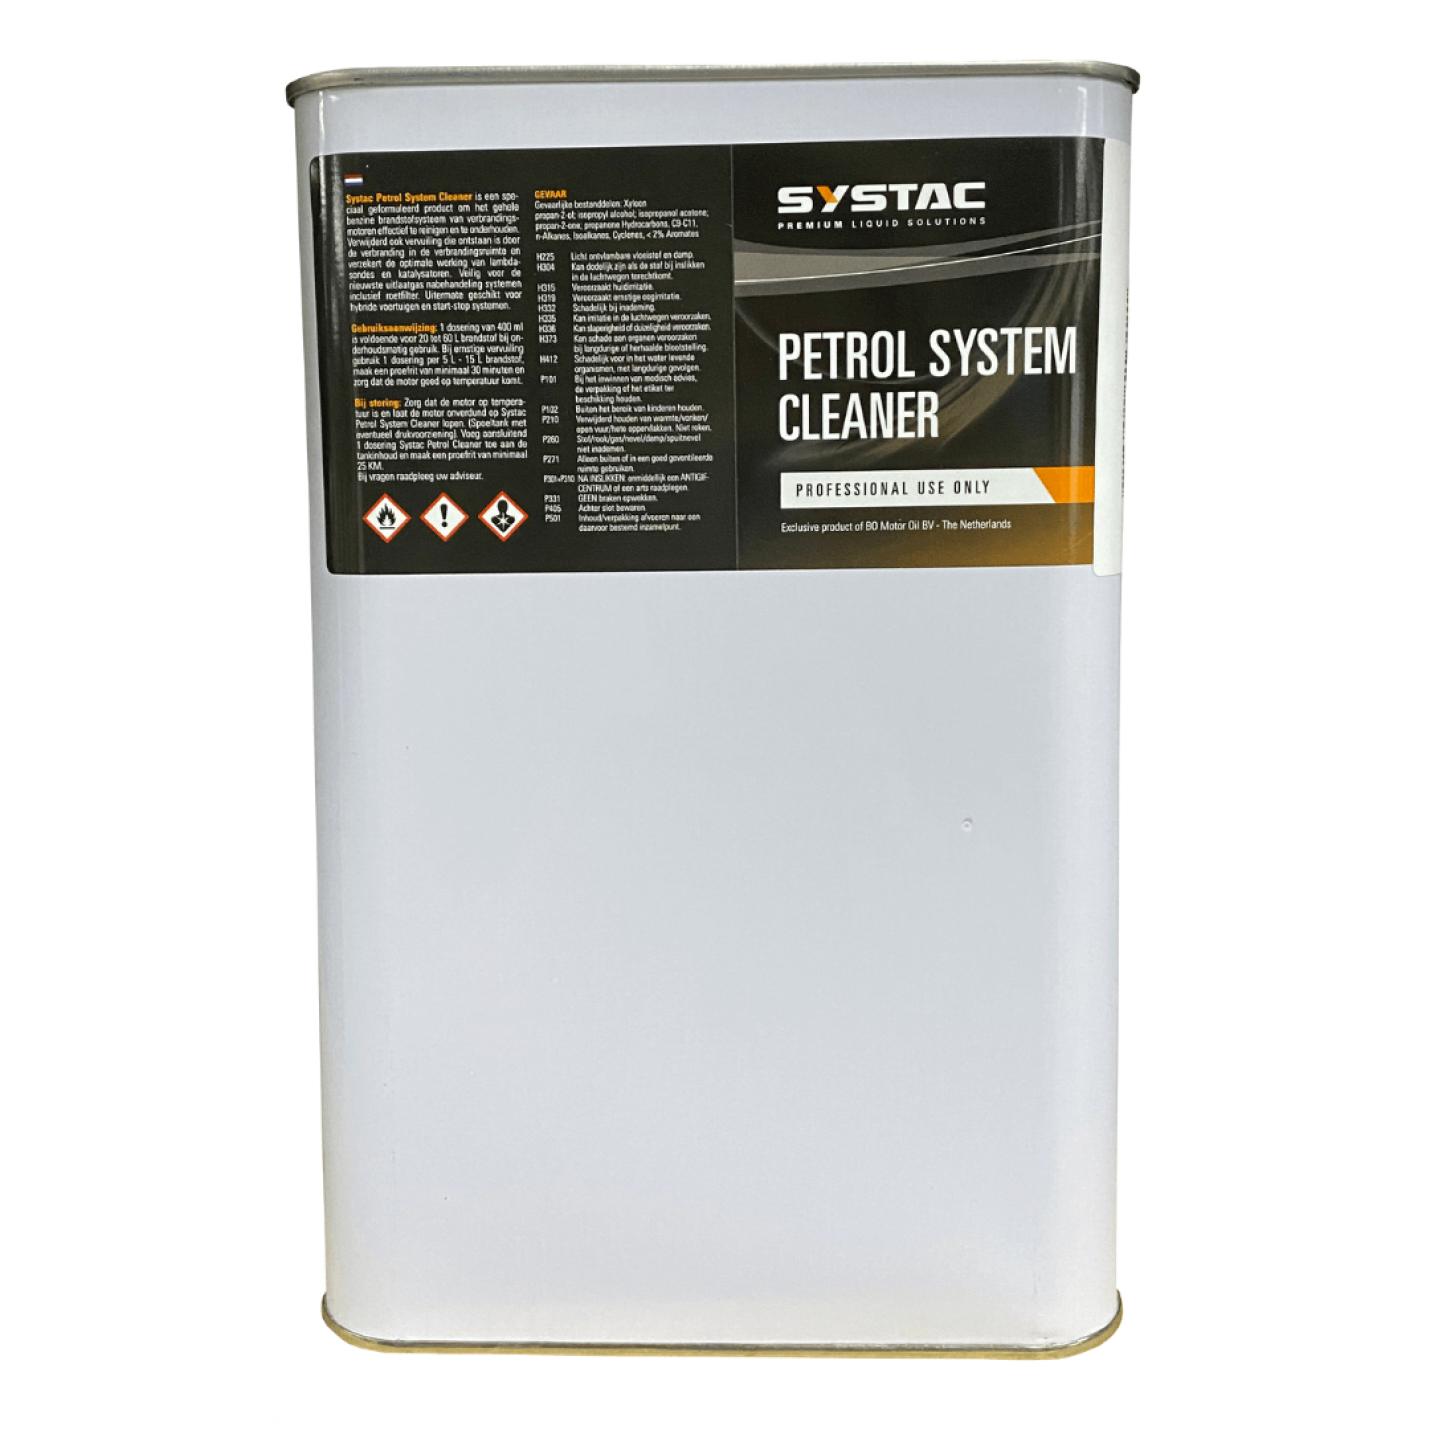 Brandstofadditief Systac Petrol System Cleaner (1L) AE-trading